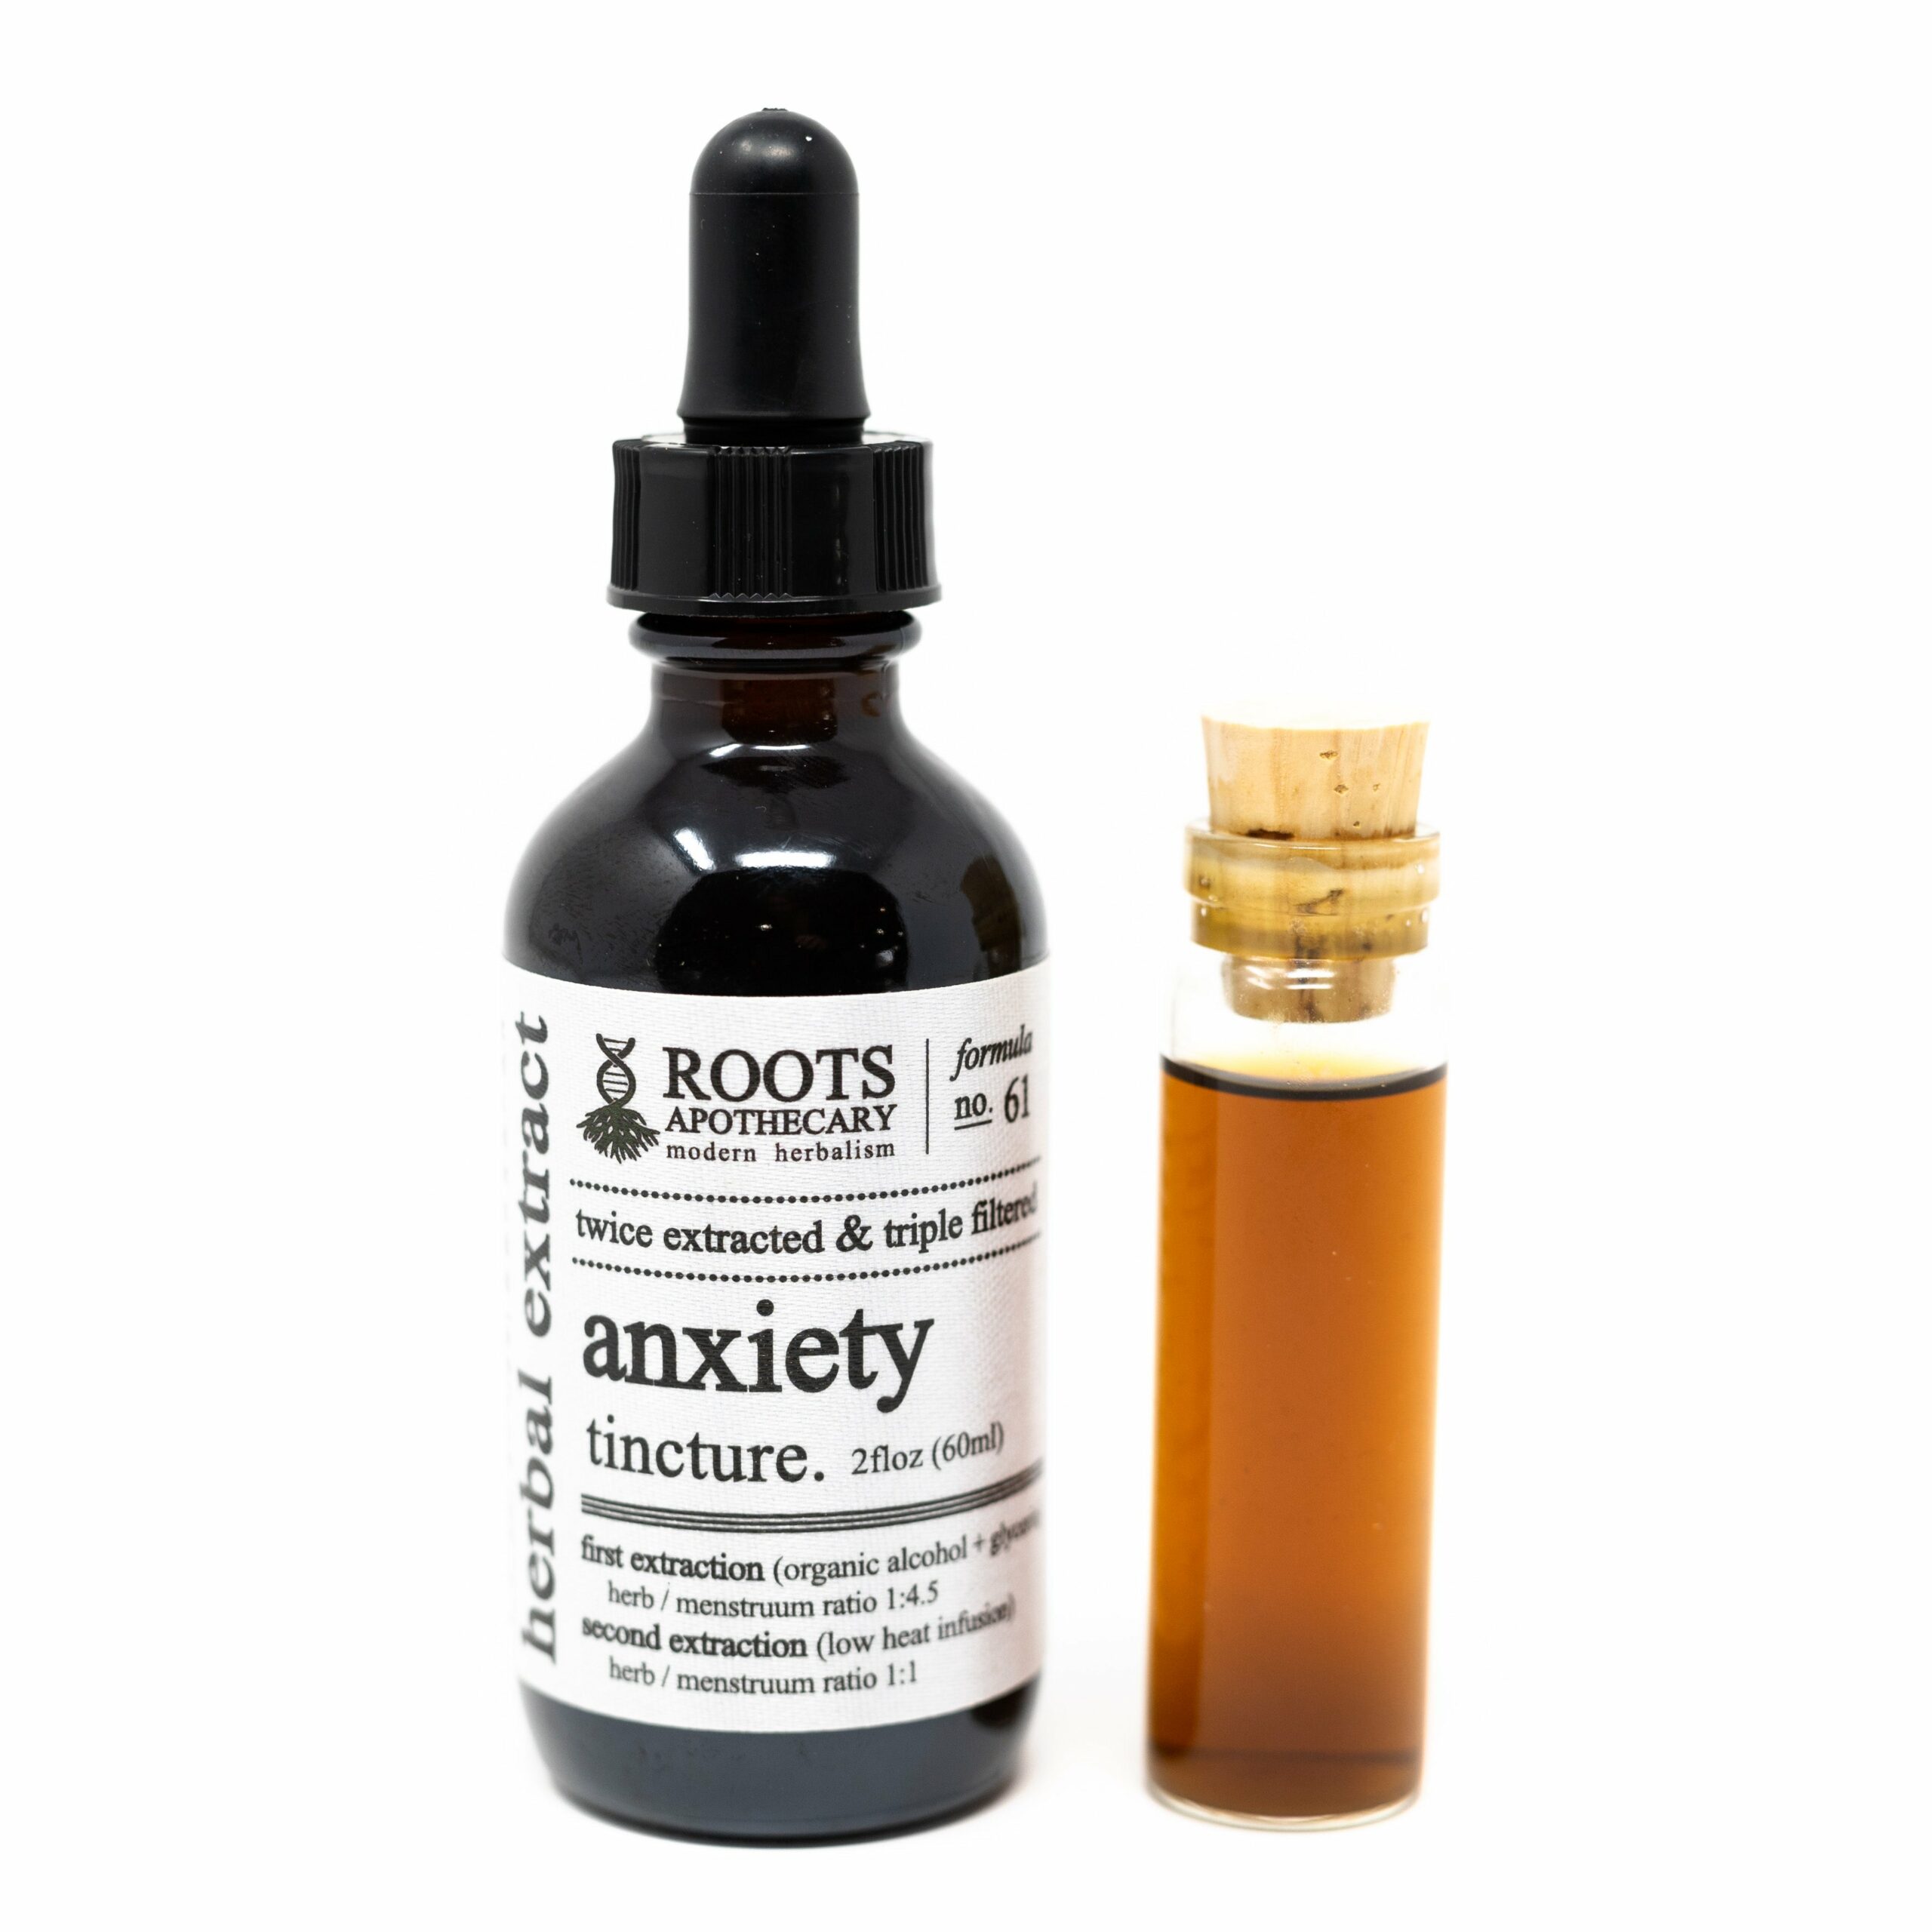 Roots Apothecary Anxiety Tincture